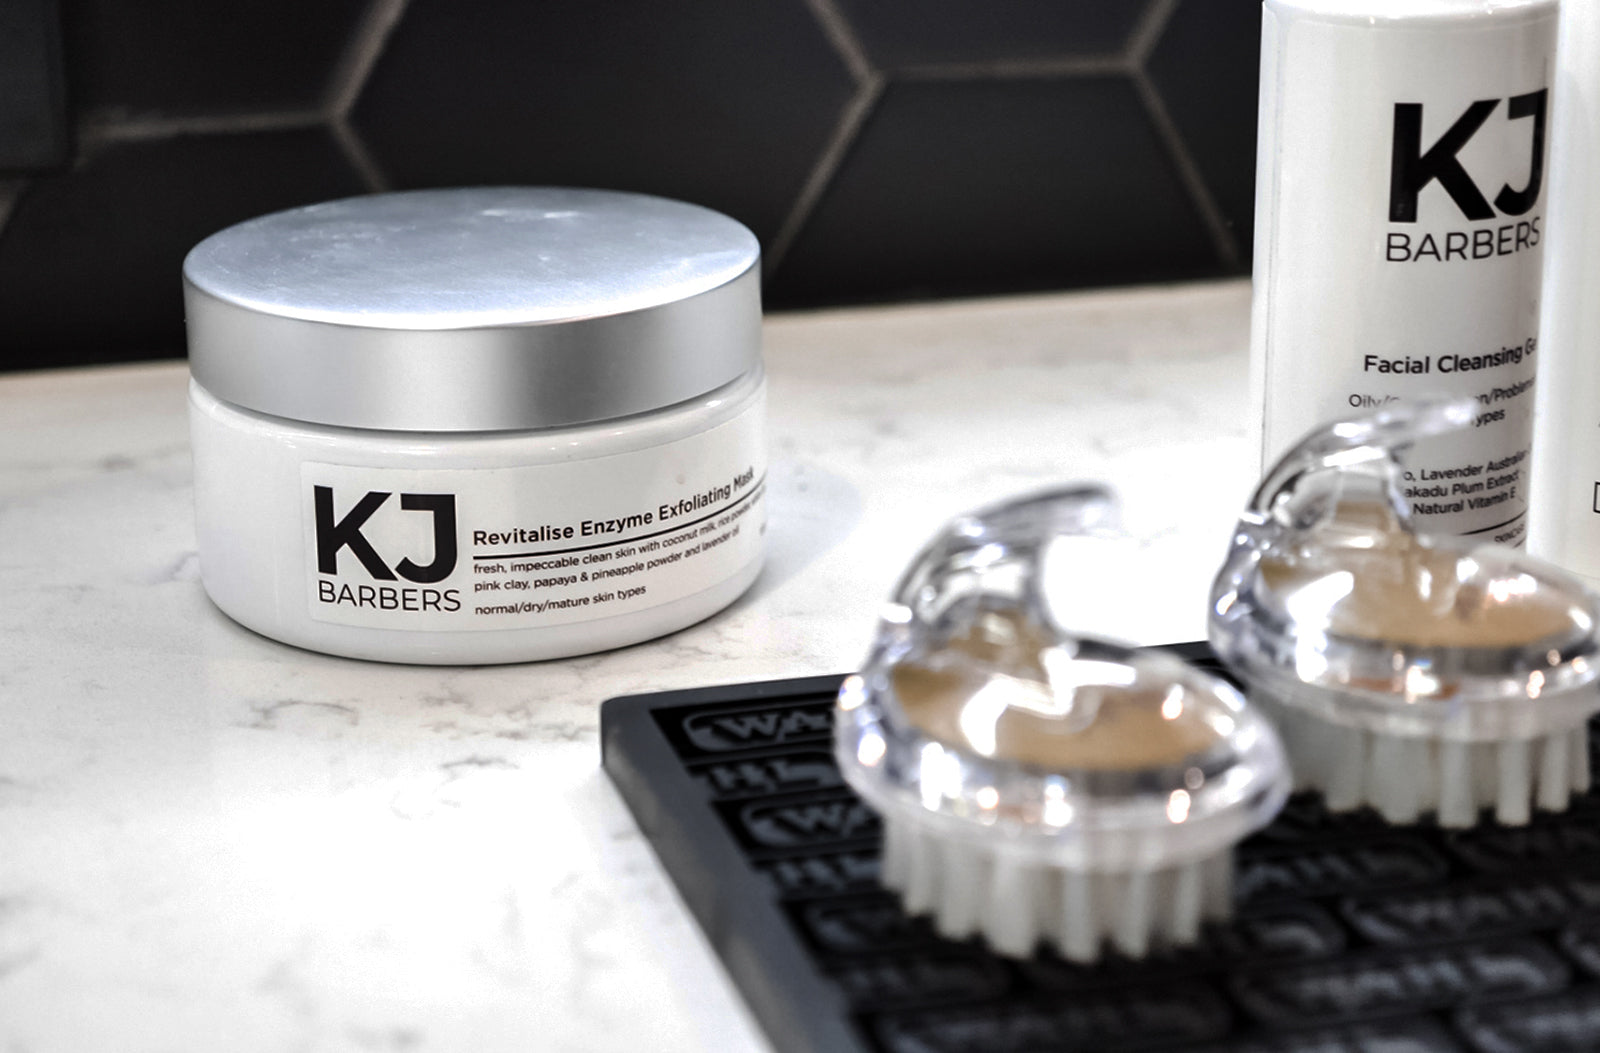 Experience a deep facial skin cleanse using KJ Barbers exclusive cleansing products